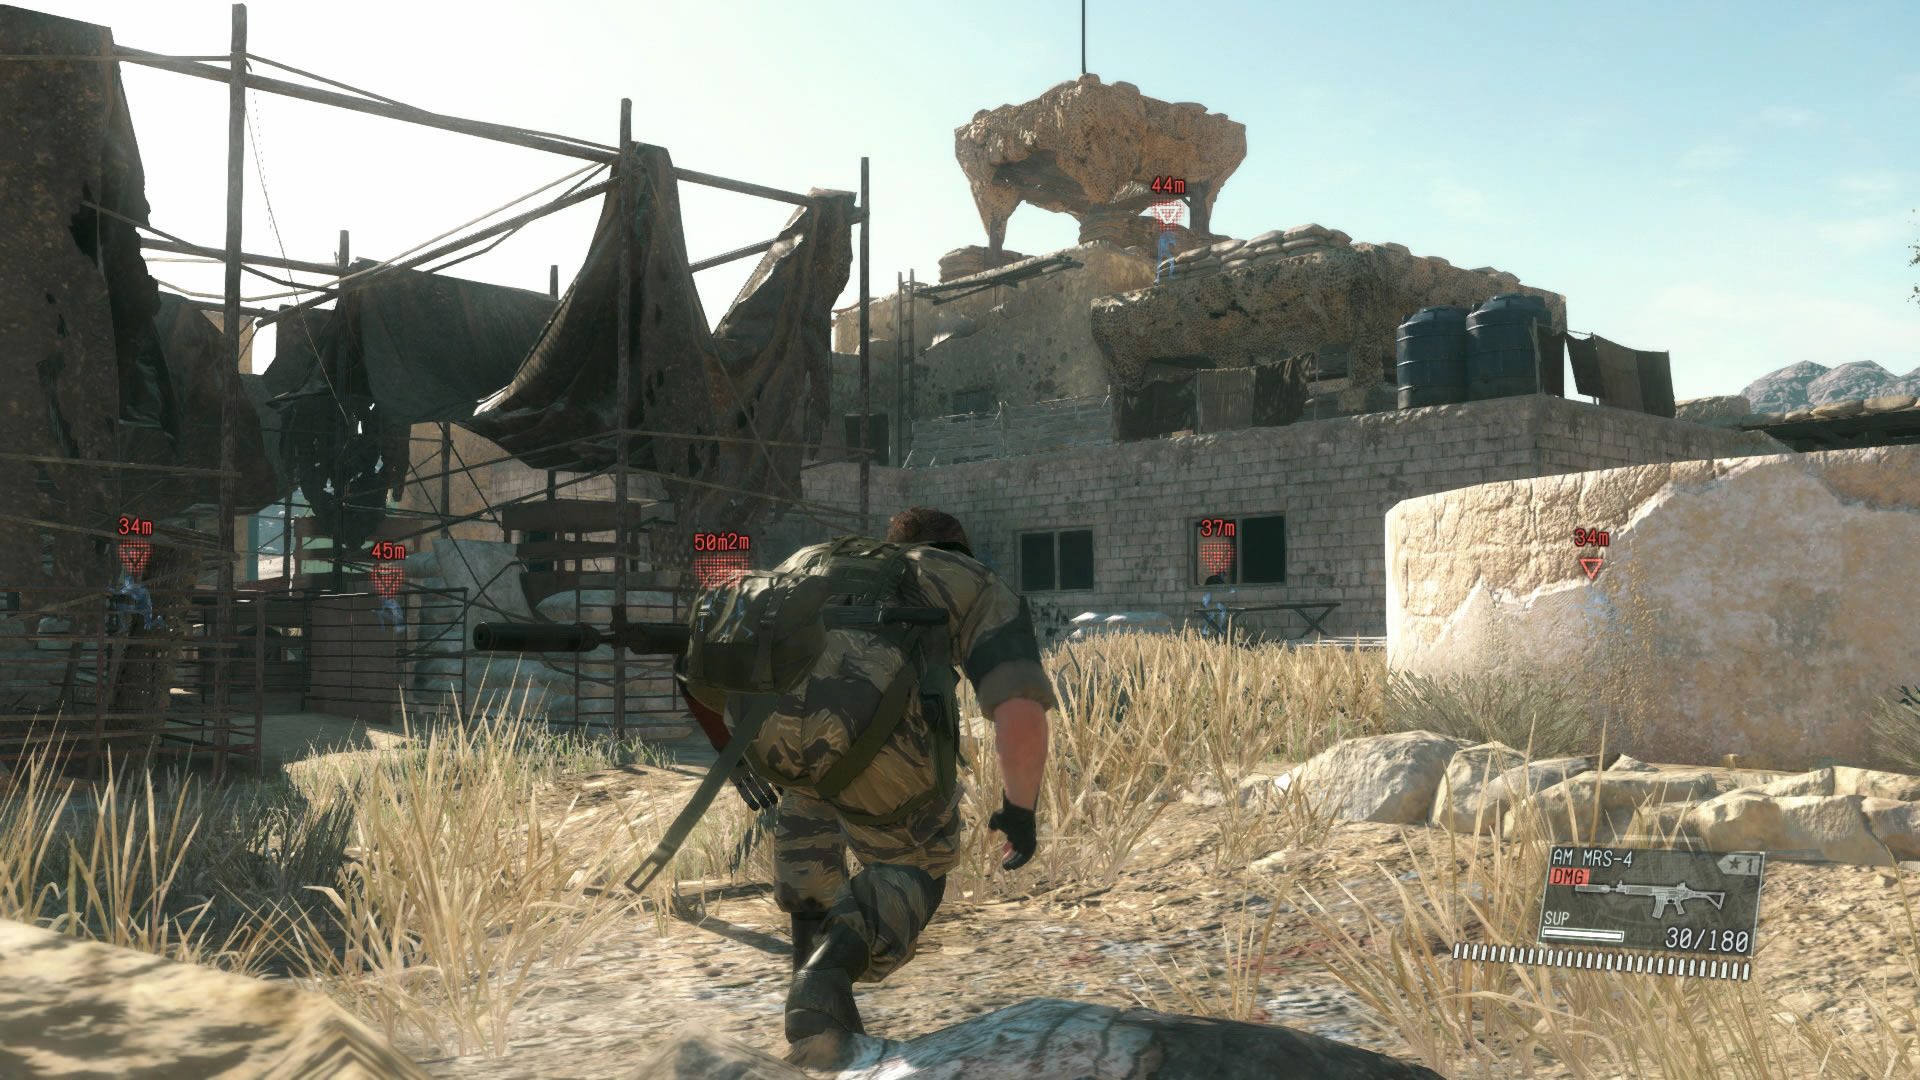 metal-gear-solid-v-the-phantom-pain-is-an-unending-battle-kill-screen-previously